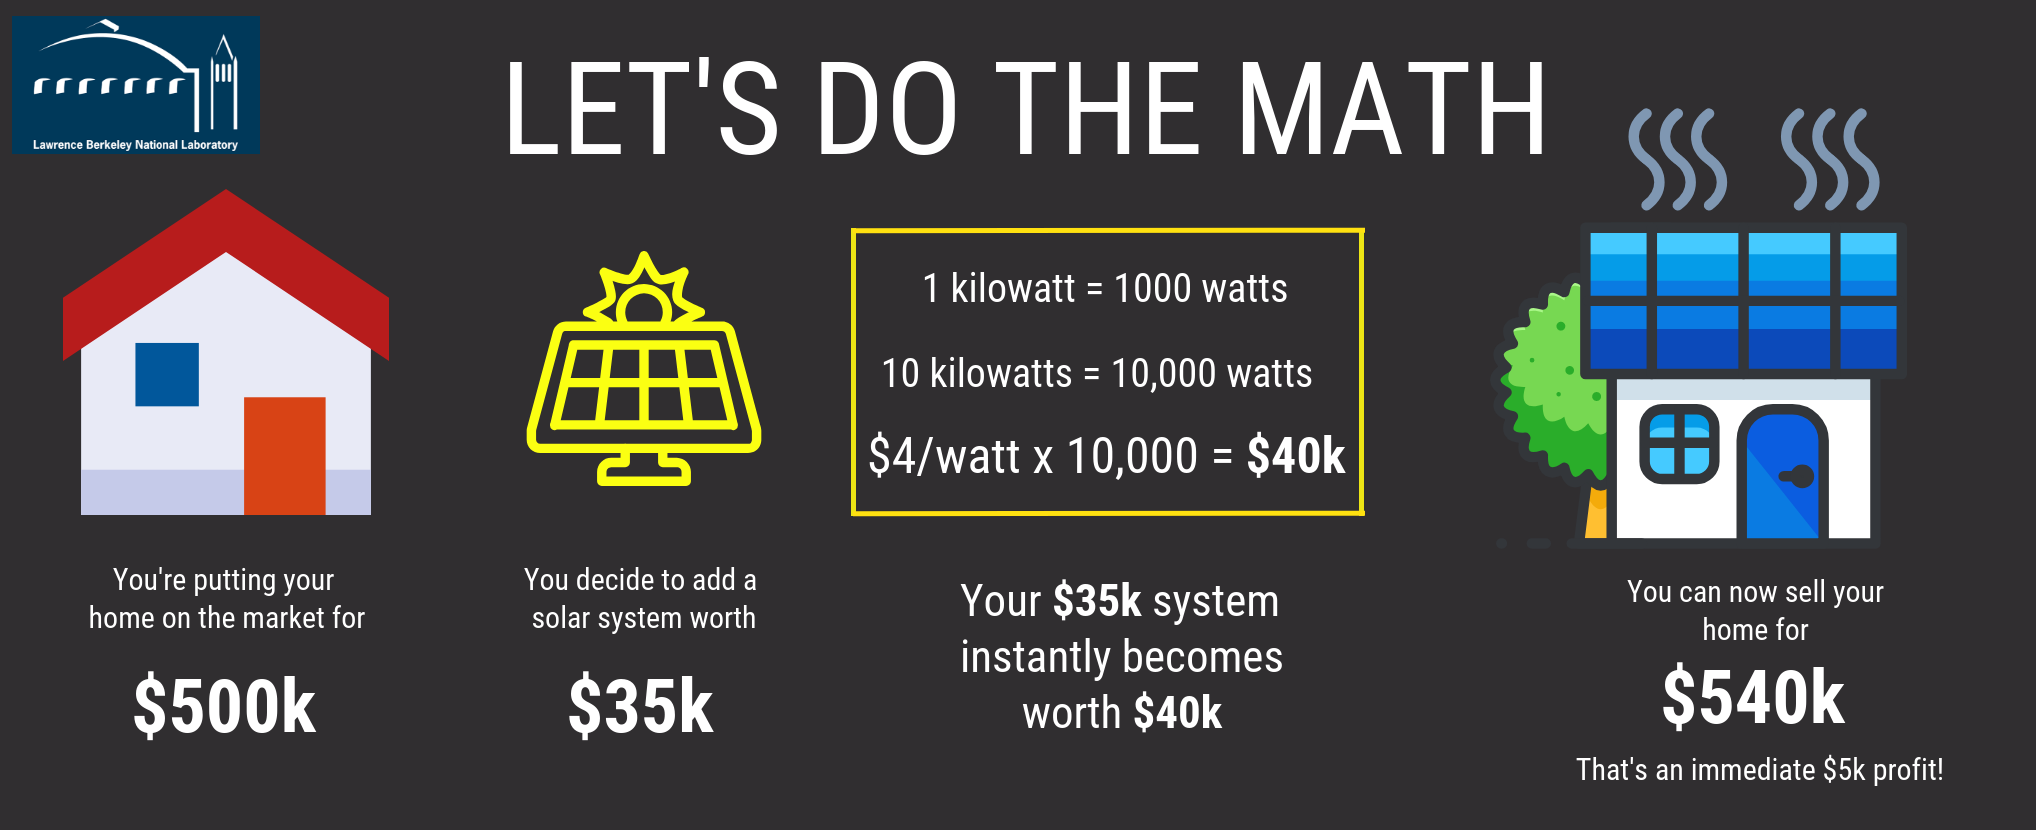 Let's Do The Math about solar power for your home